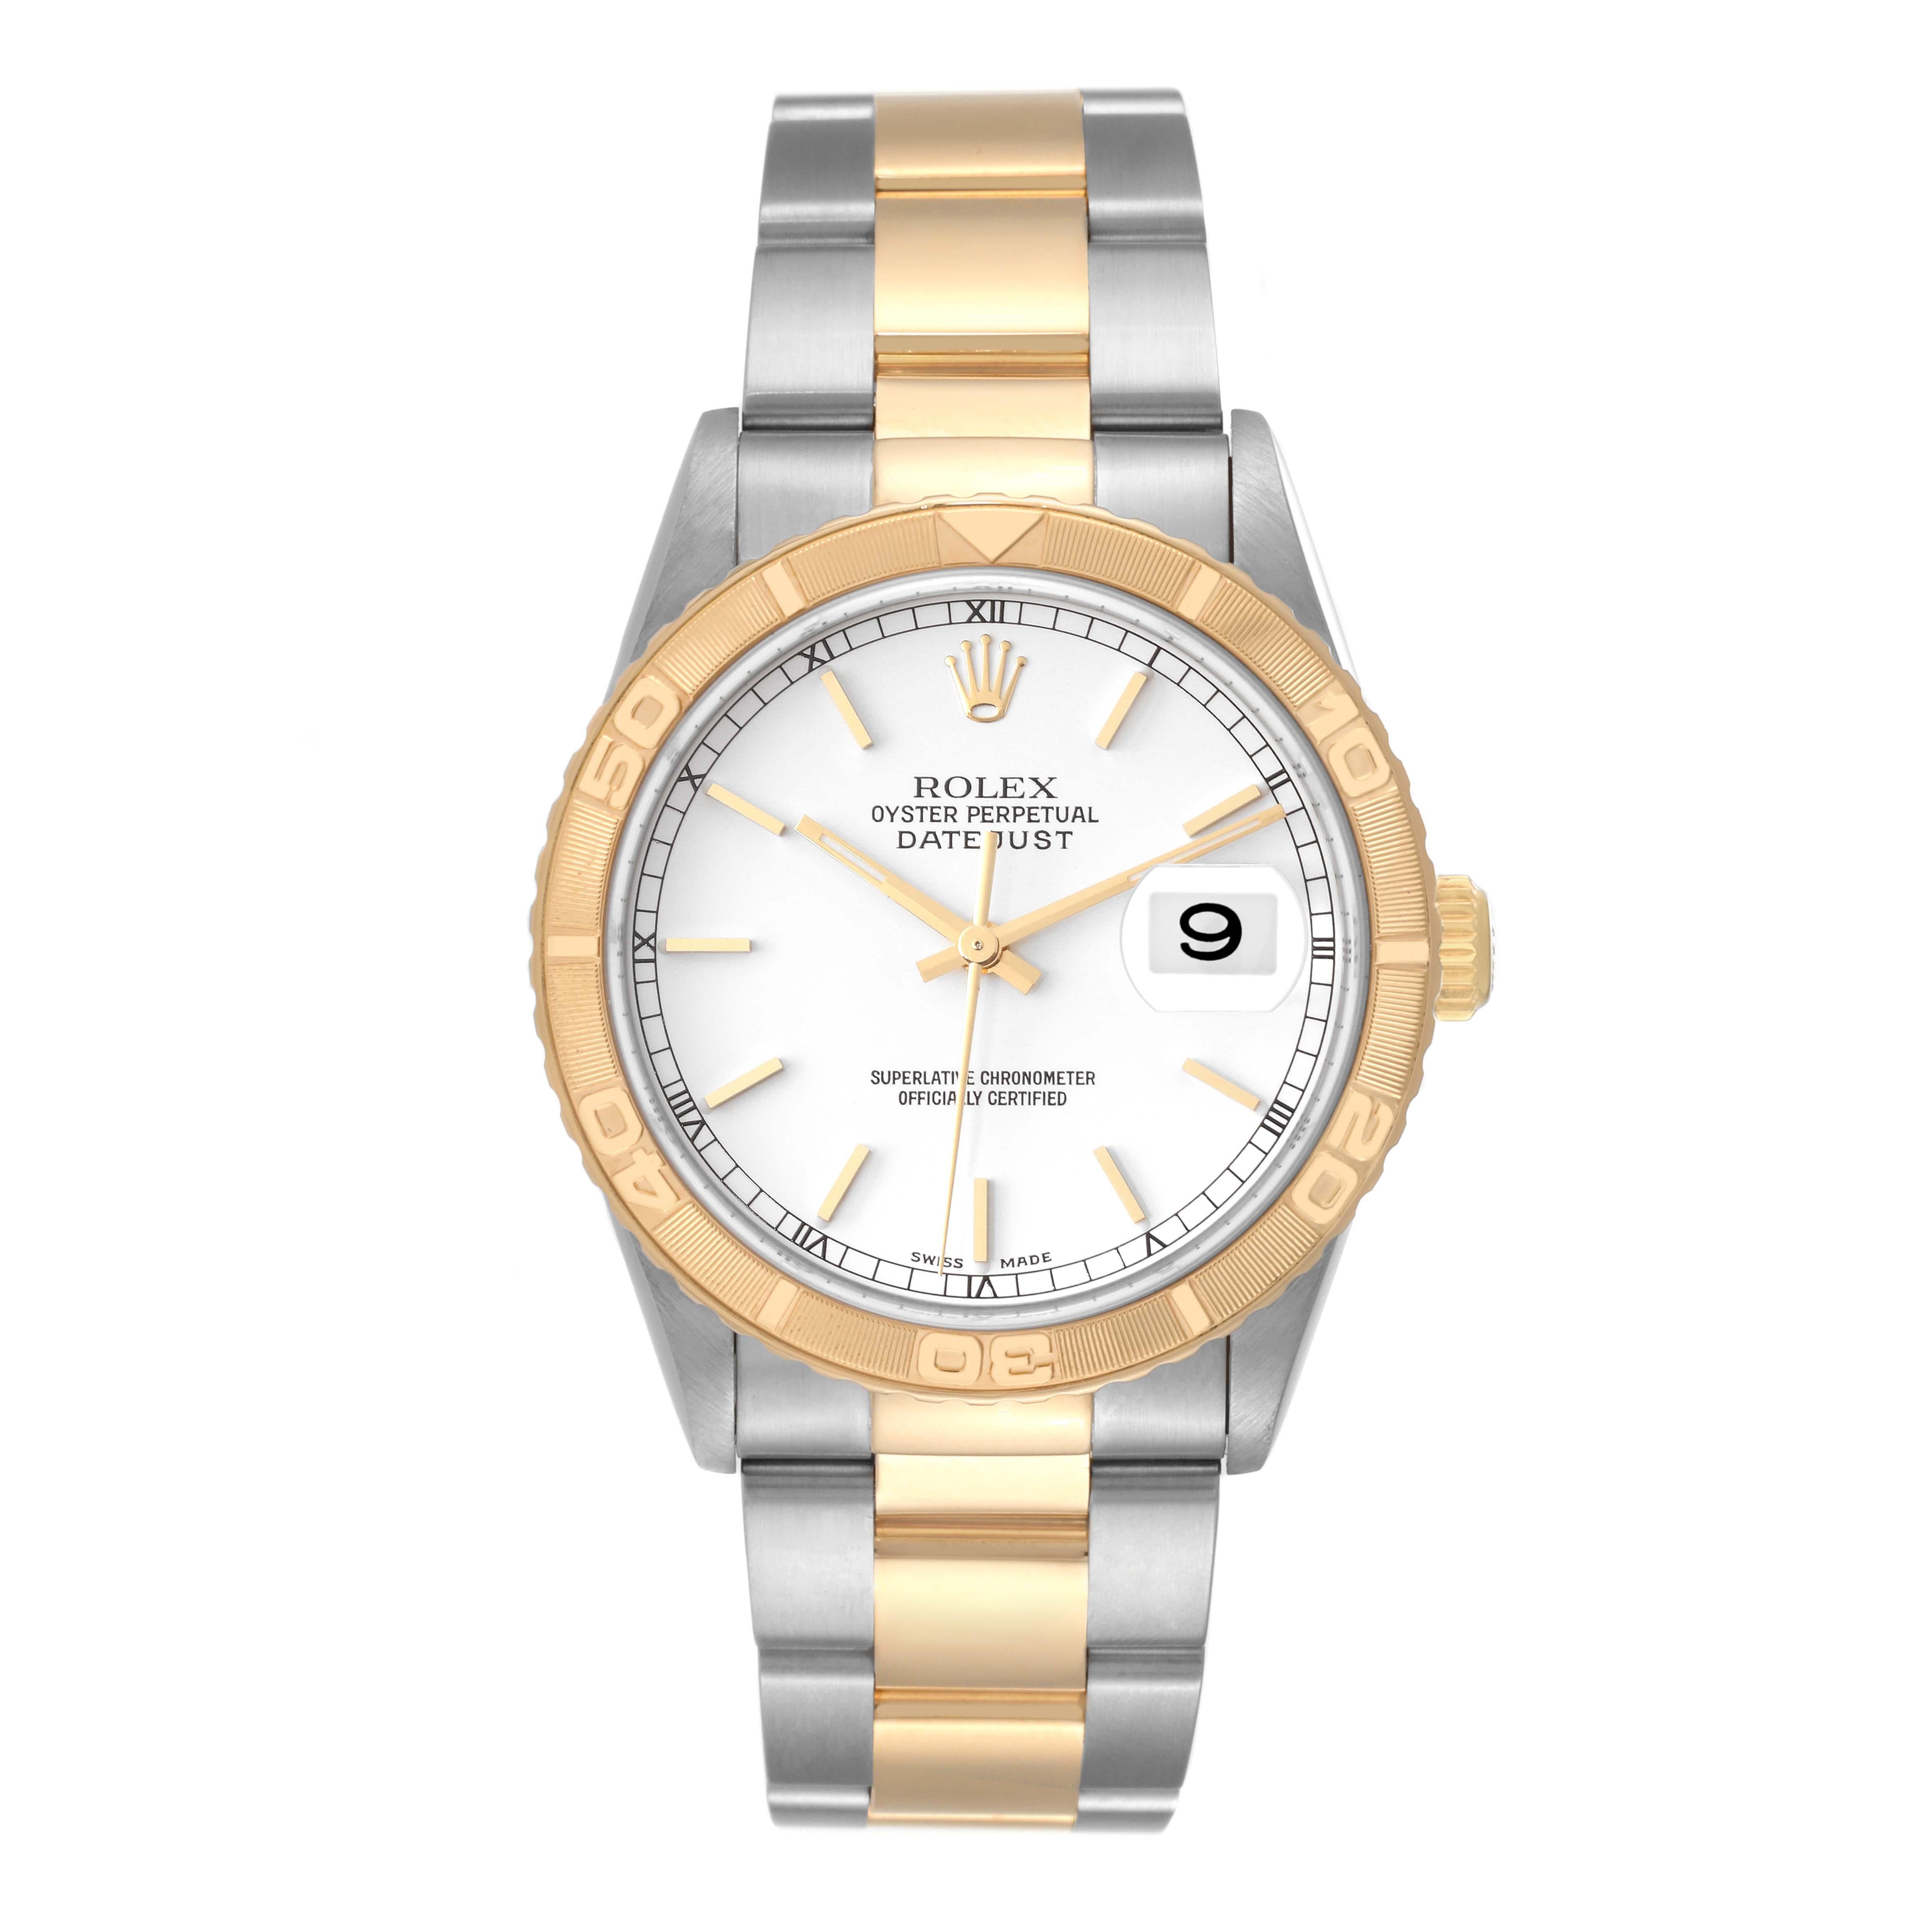 Rolex Datejust Turnograph Steel Yellow Gold White Dial Mens Watch 16263. Officially certified chronometer self-winding movement. Stainless steel case 36 mm in diameter. Rolex logo on an 18K yellow gold crown. 18k yellow gold 